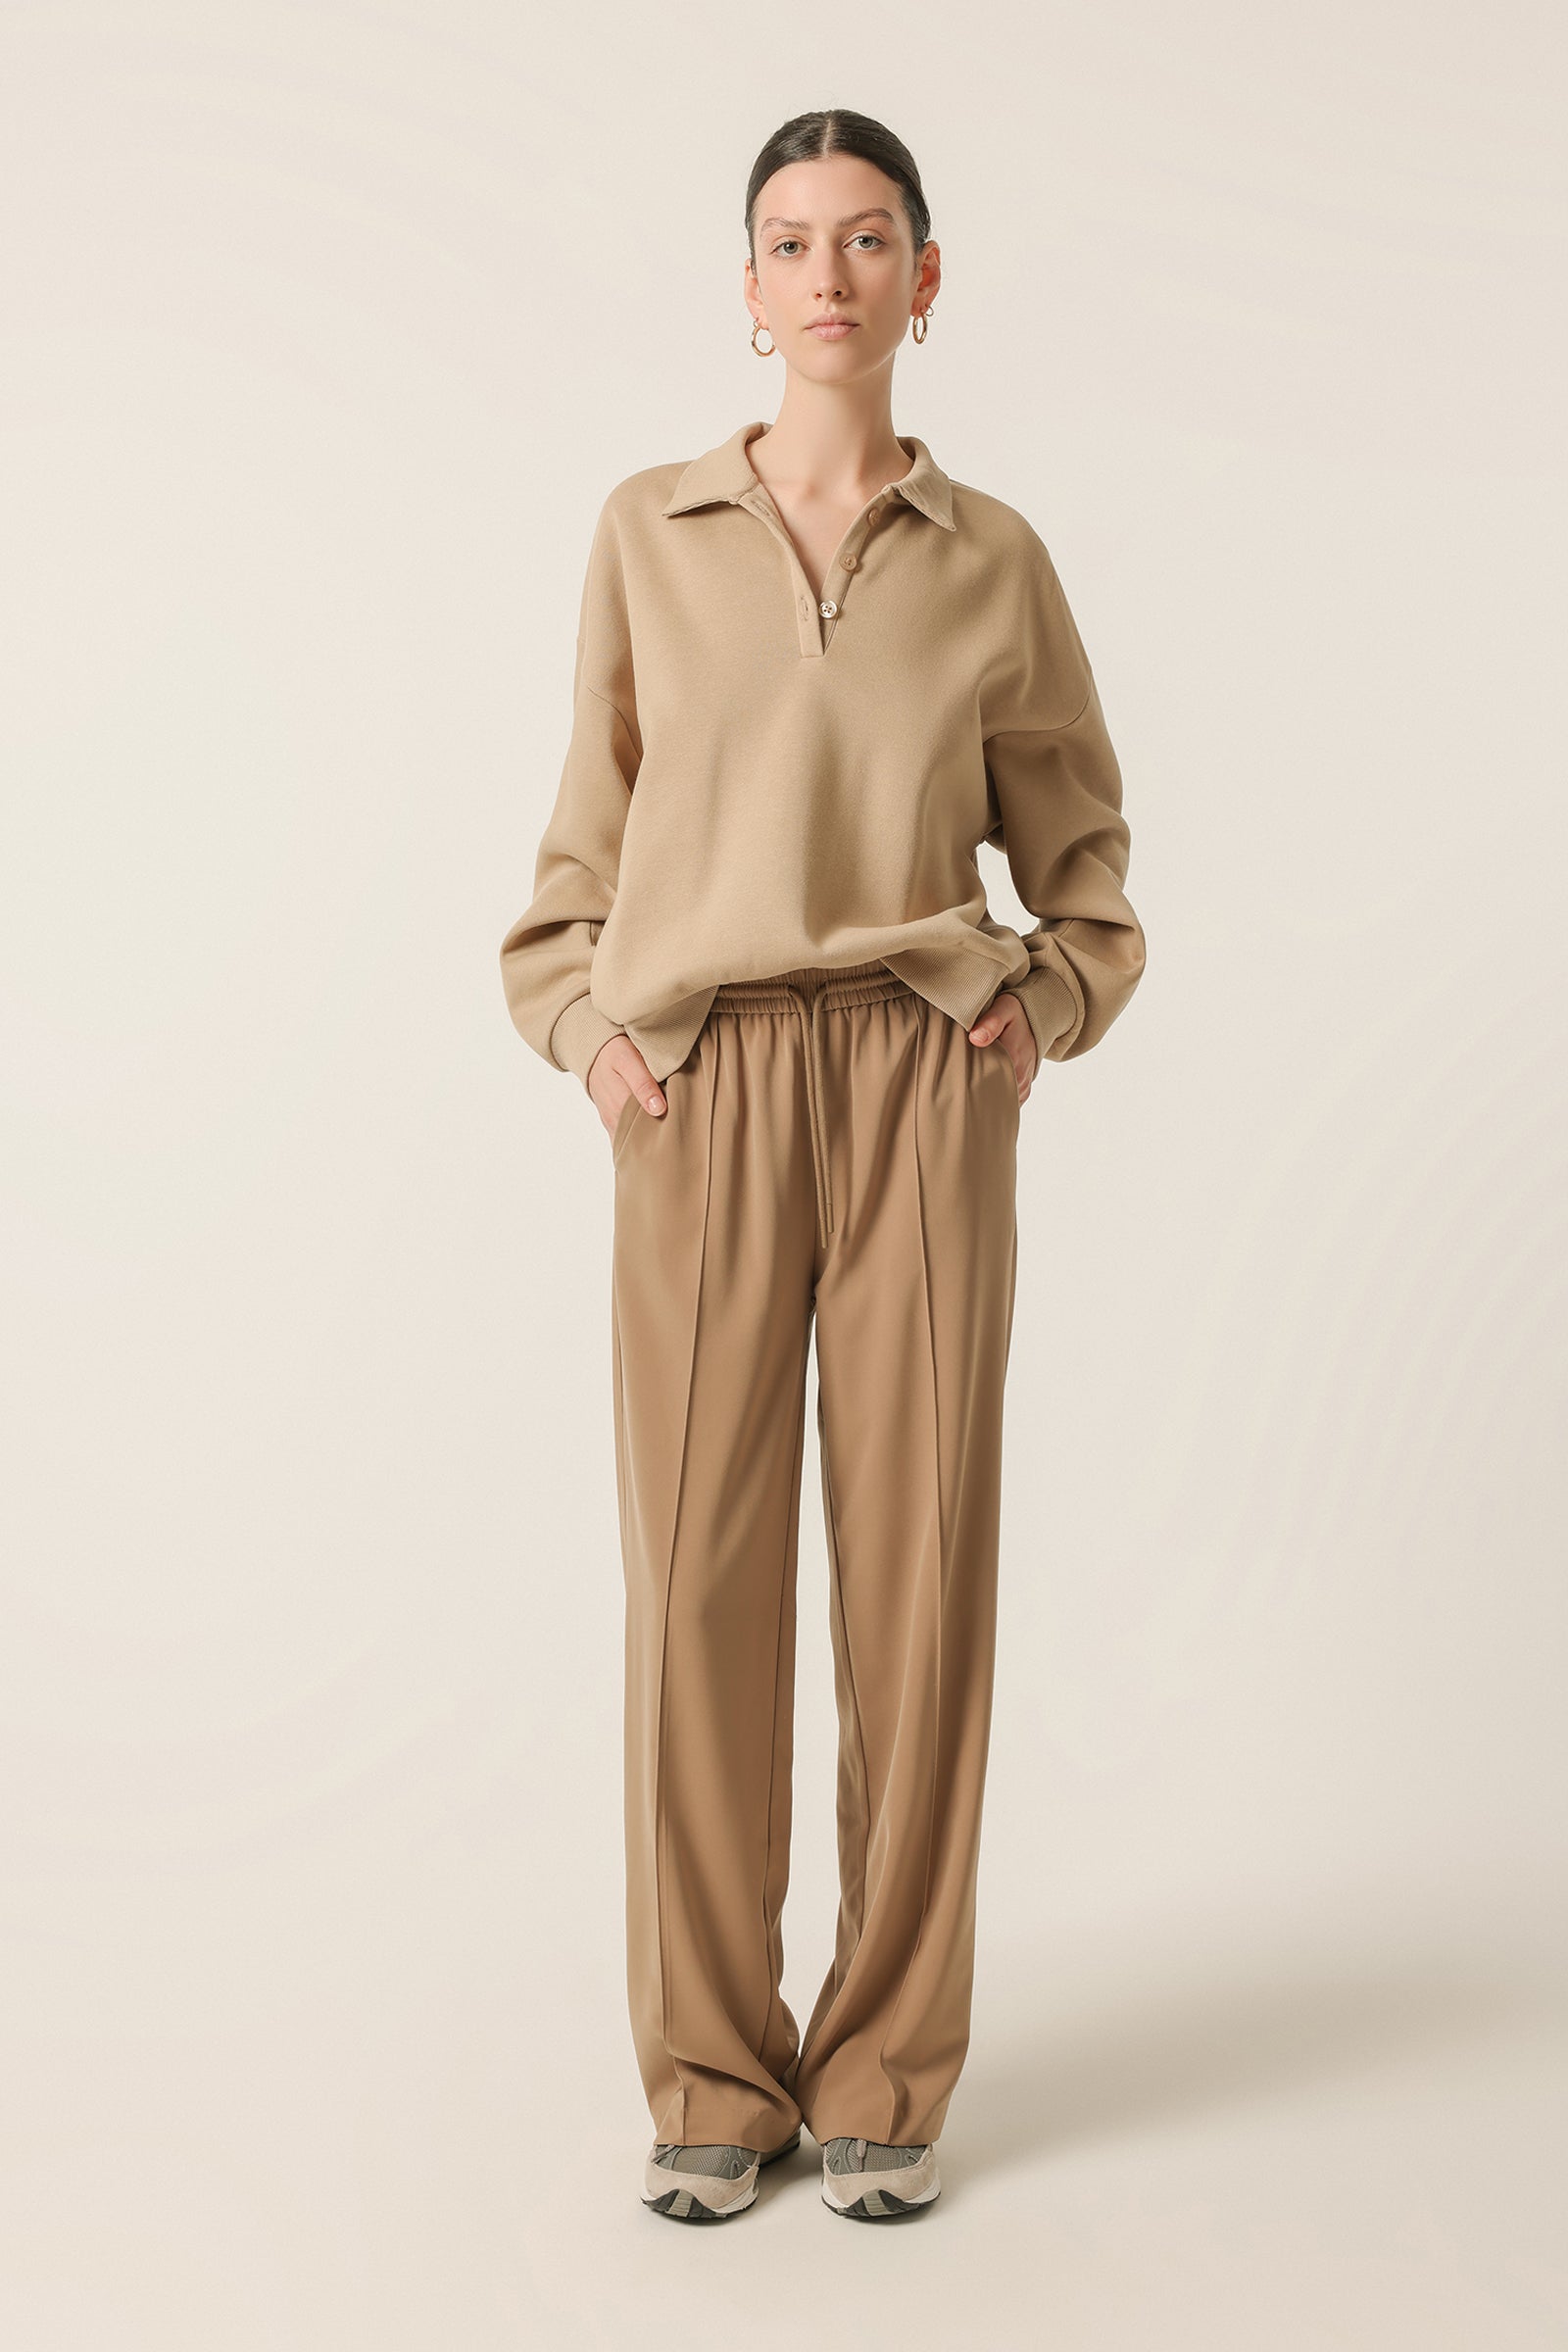 Nude Lucy Melrose Pant In a Beige Sepia Colour